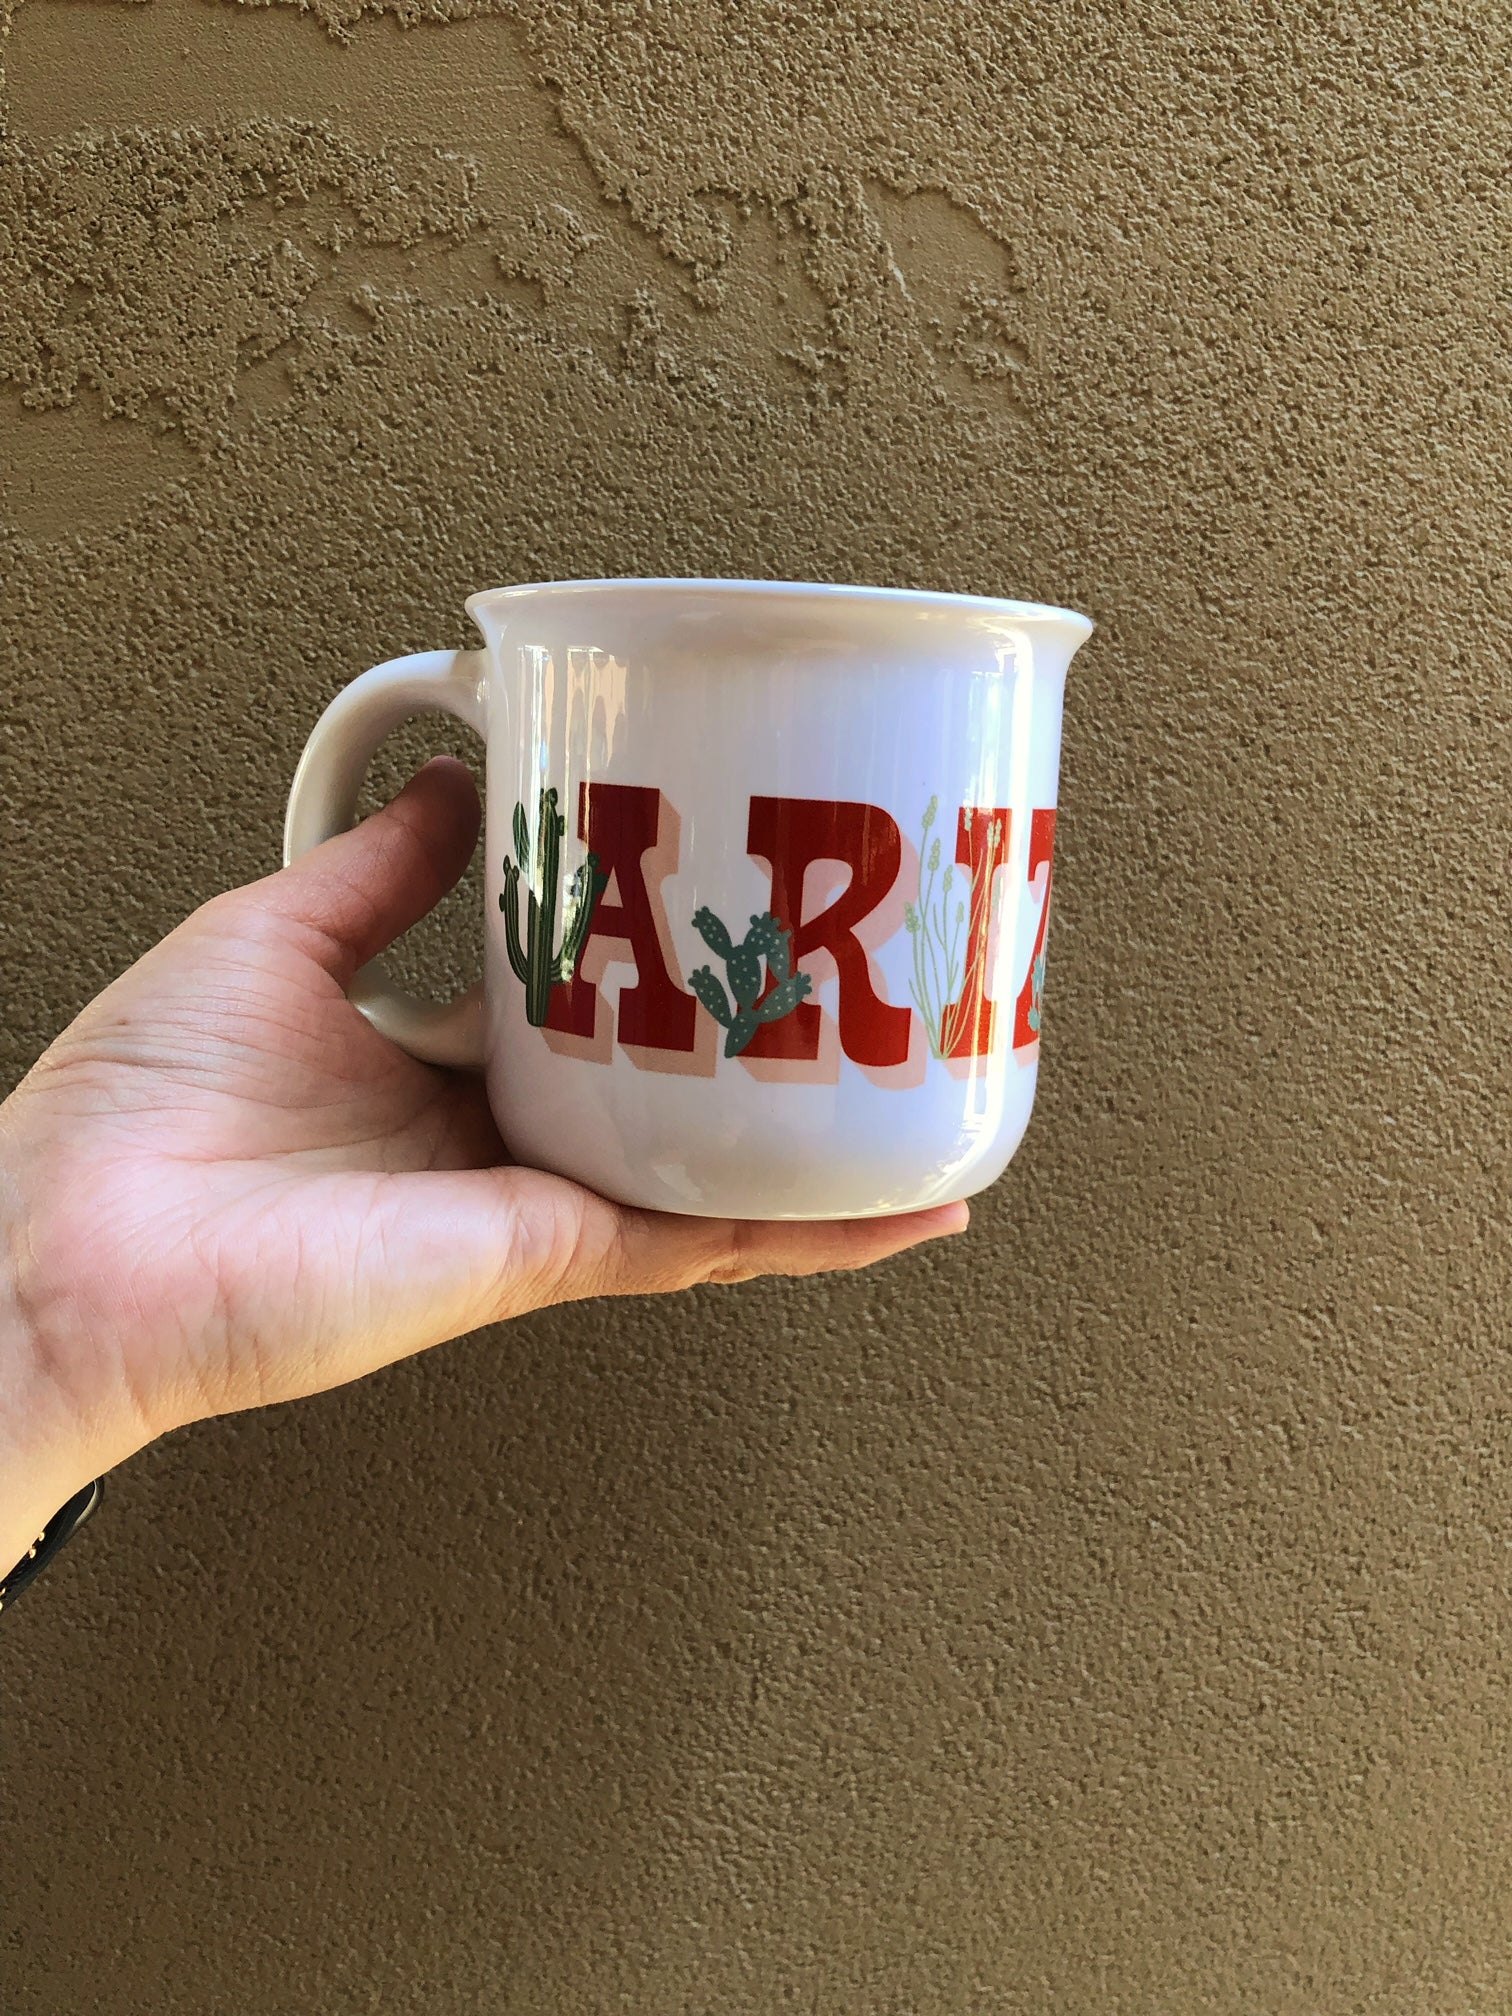 A hand holding an Arizona mug in front of a stucco wall